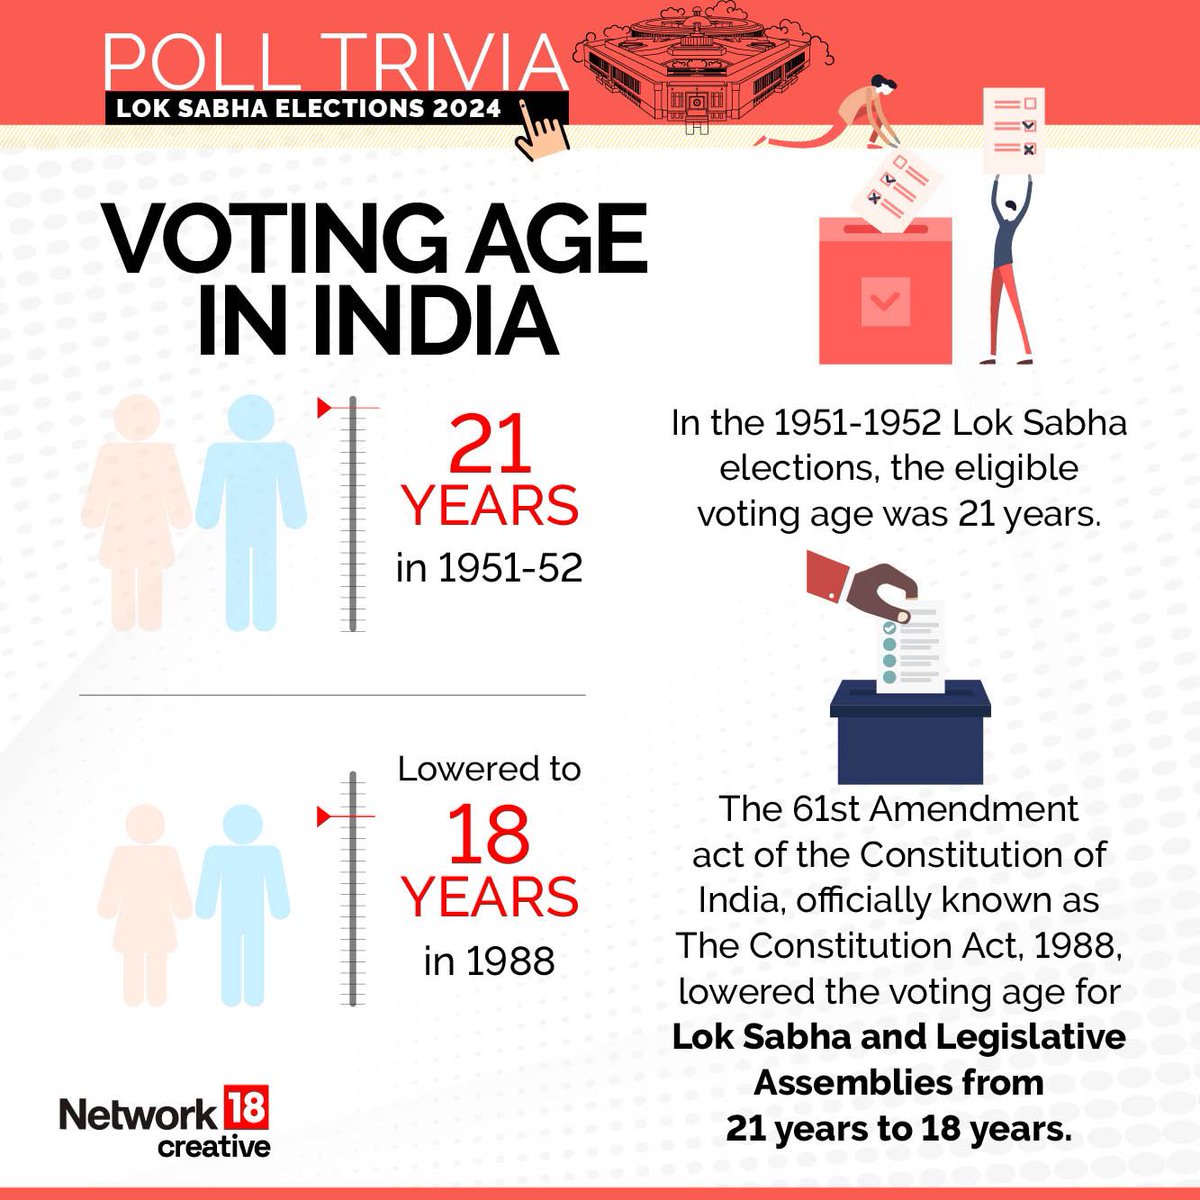 🗳️ #PollTrivia: Dive into the past and present with a look at the candidates from the first Lok Sabha polls in 1952 versus those in 2019.

How have the contests evolved? 

#ElectionsWithMC #ElectionHistory #LokSabhaPolls 🇮🇳⏳